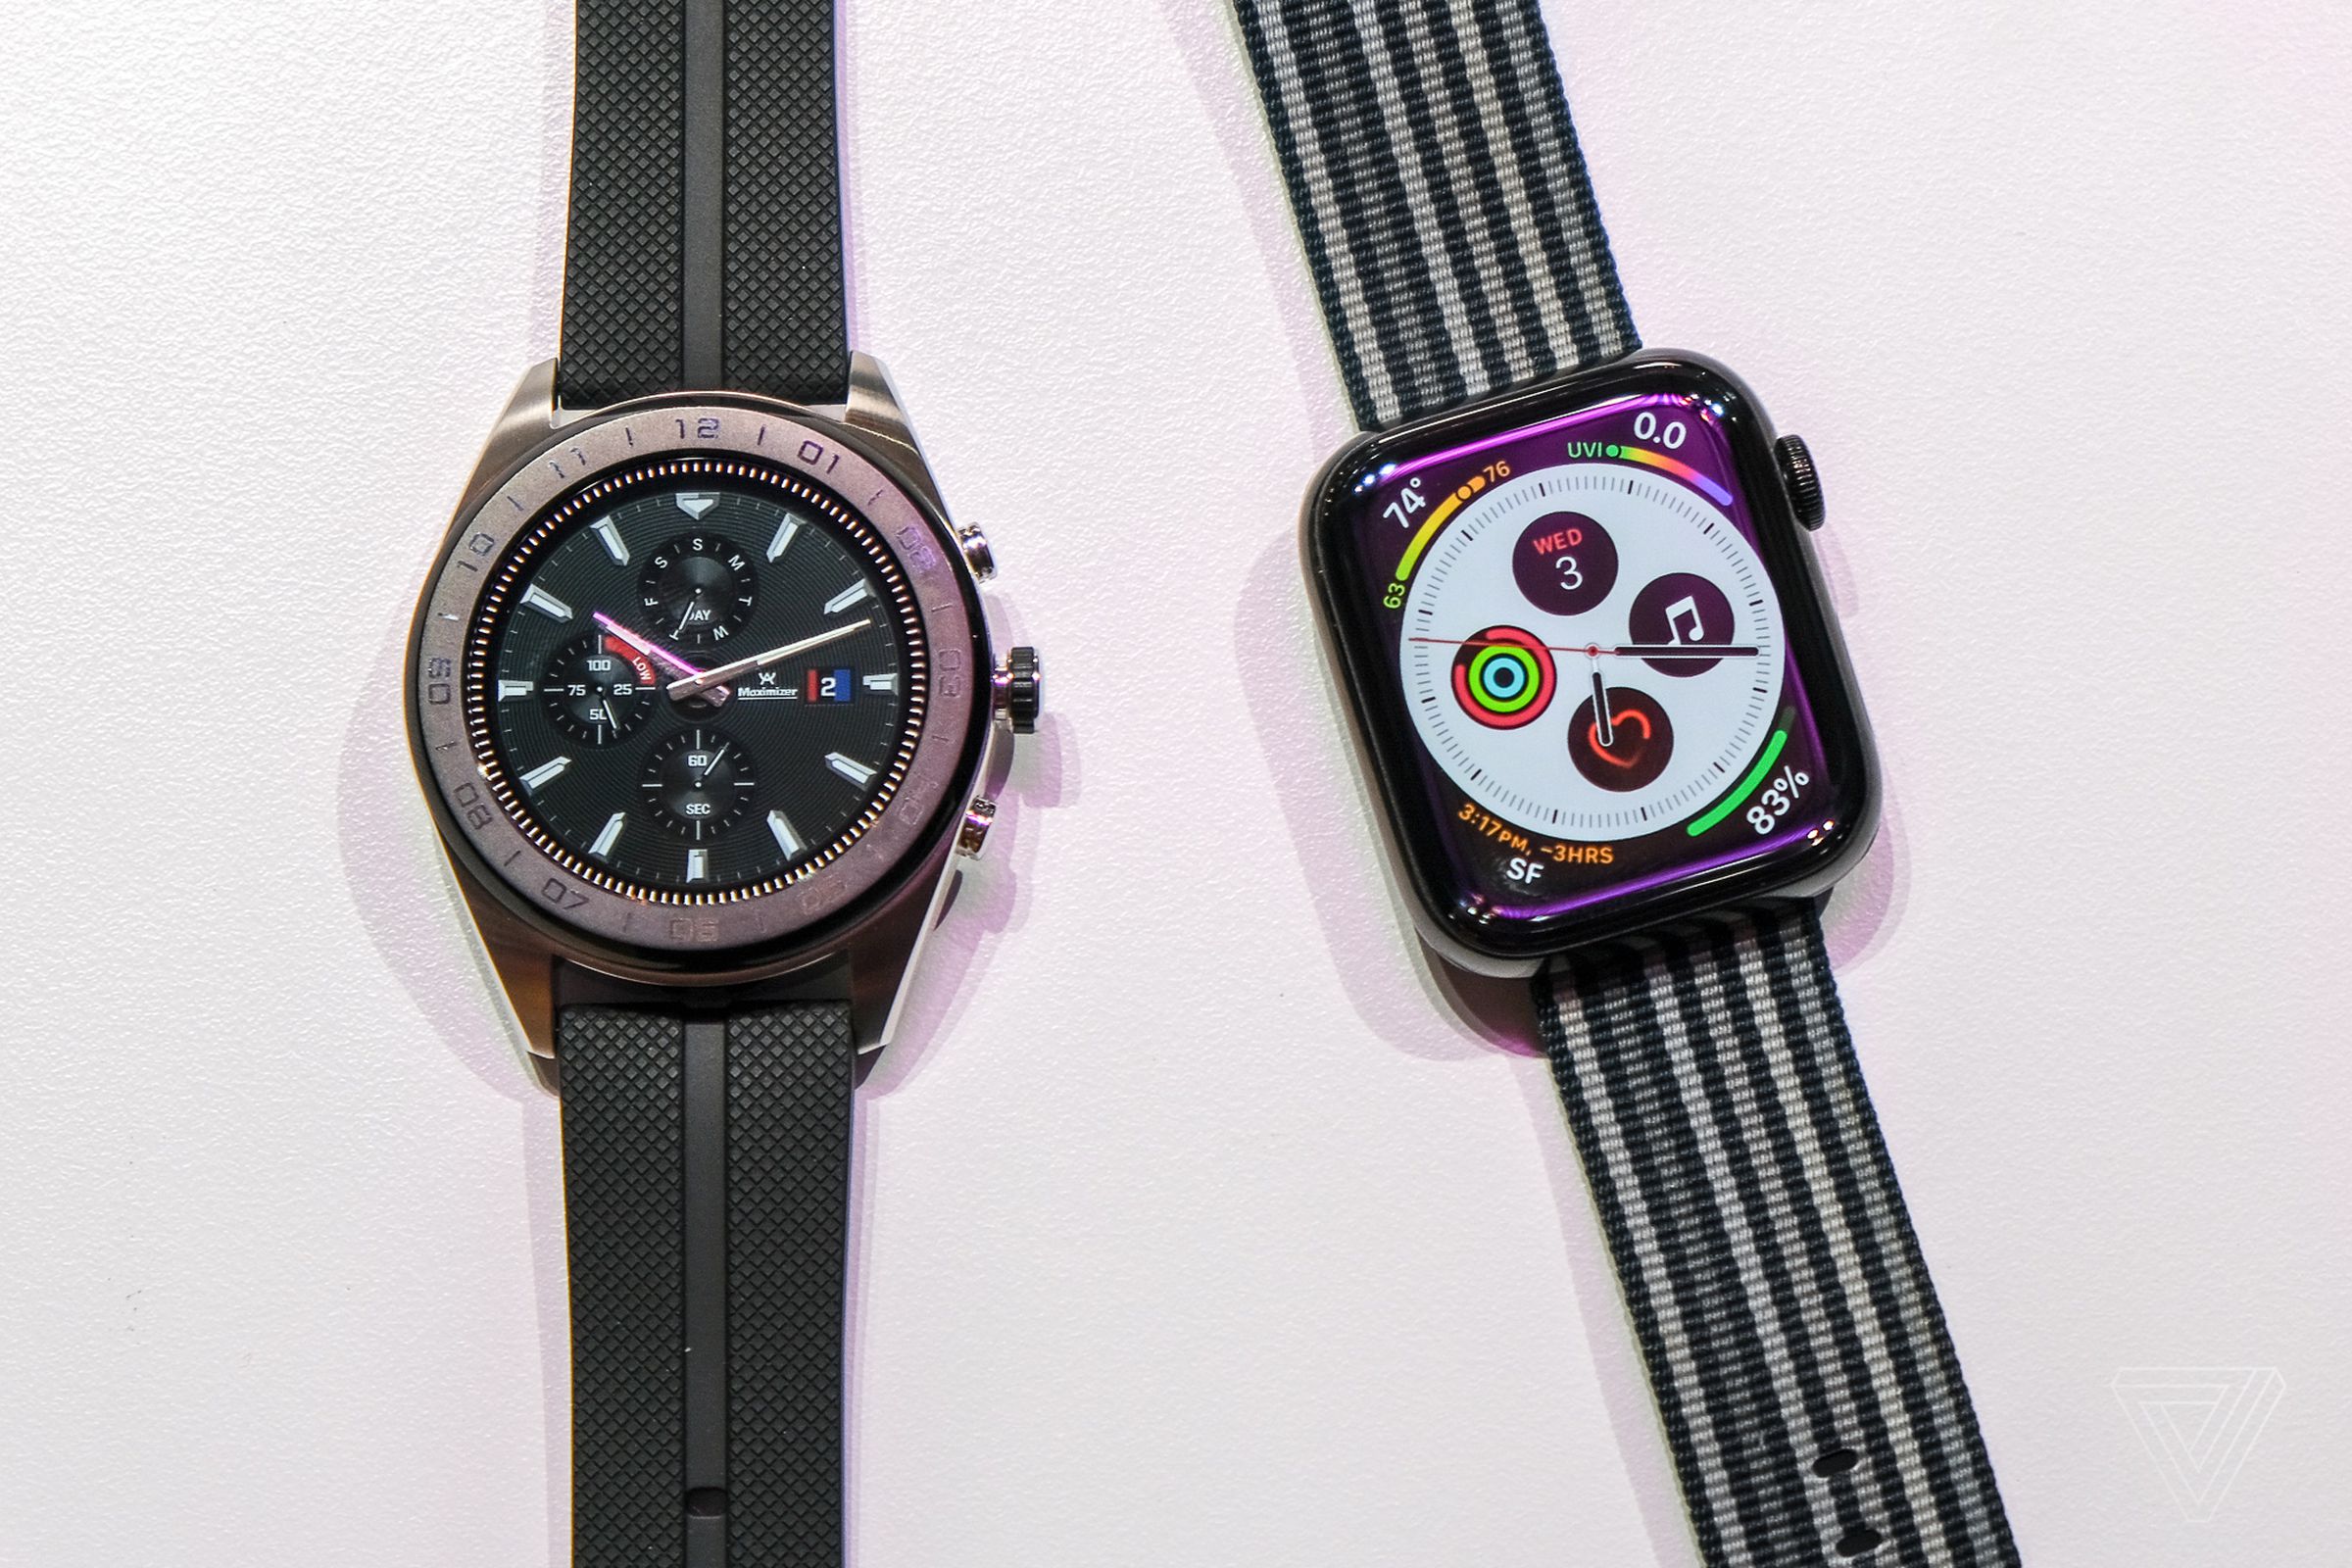 LG’s new Watch W7 next to a 44mm Apple Watch Series 4.